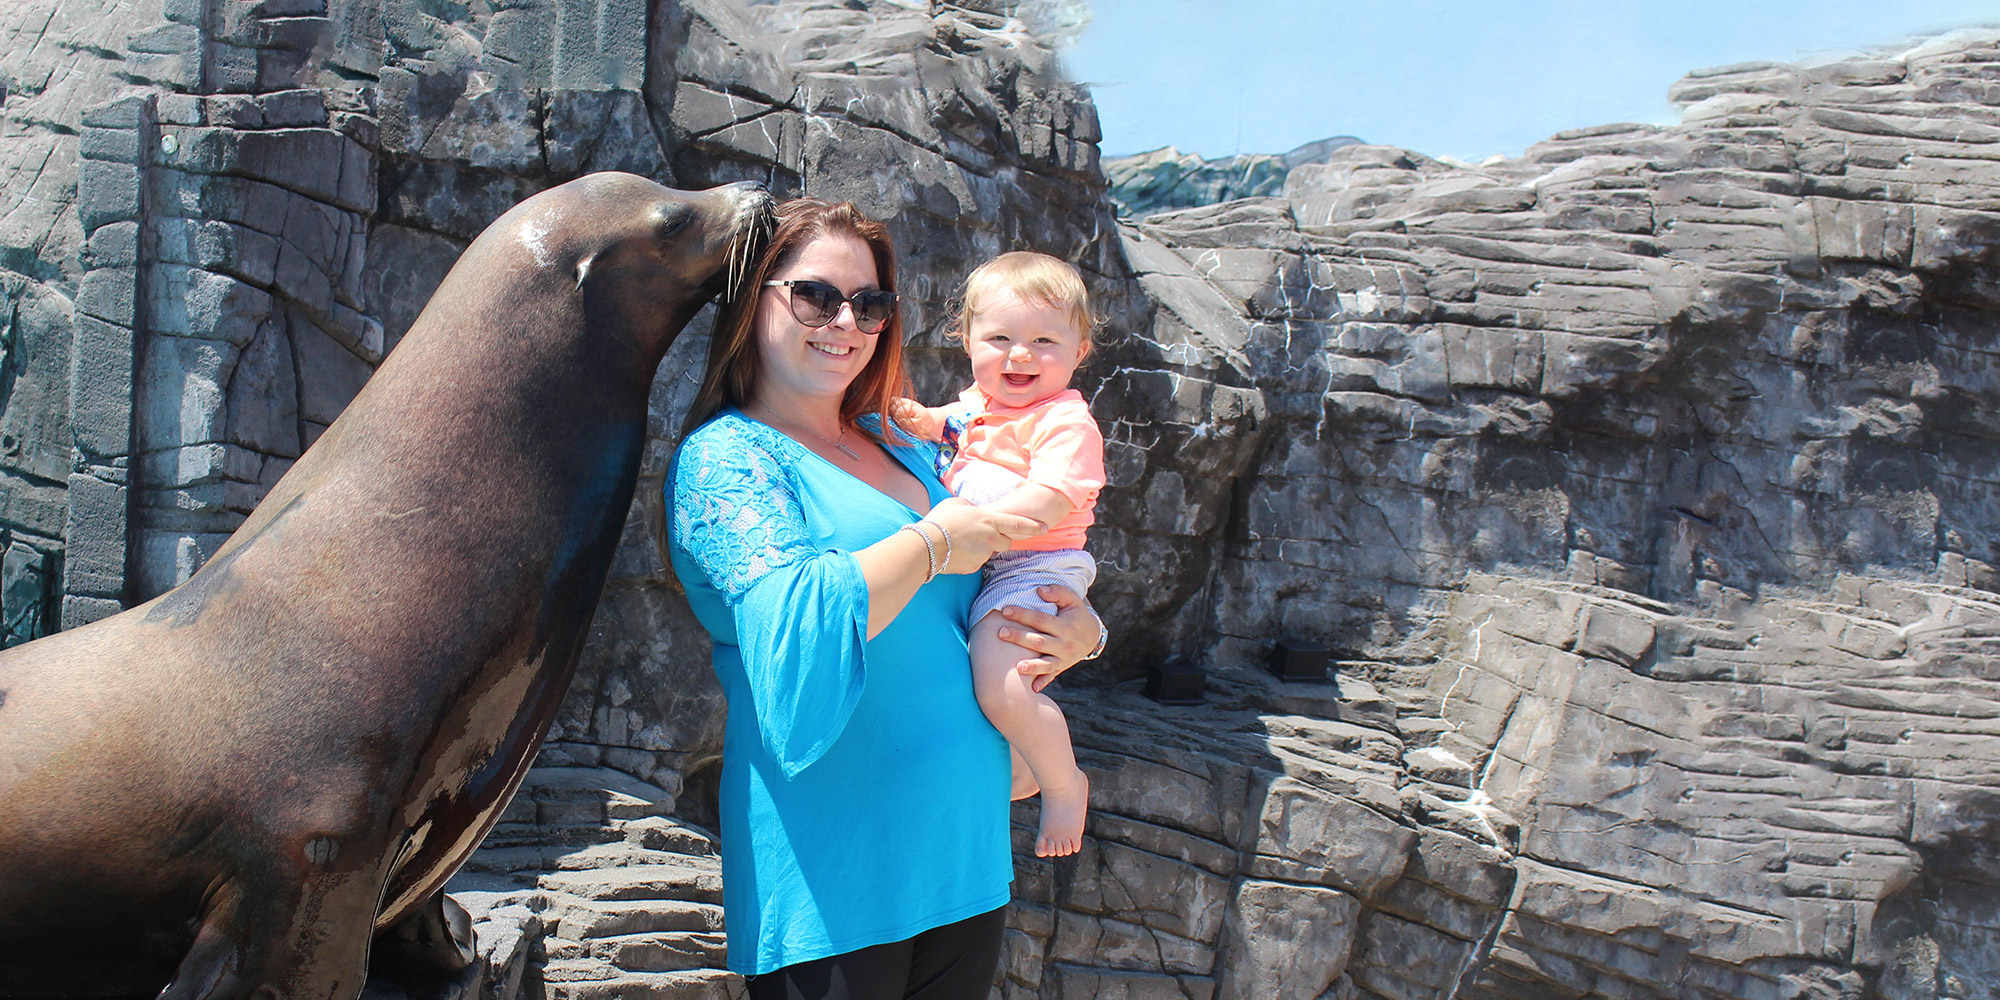 Woman and duaghter doing a "Sea Lion Selfie" at LIA